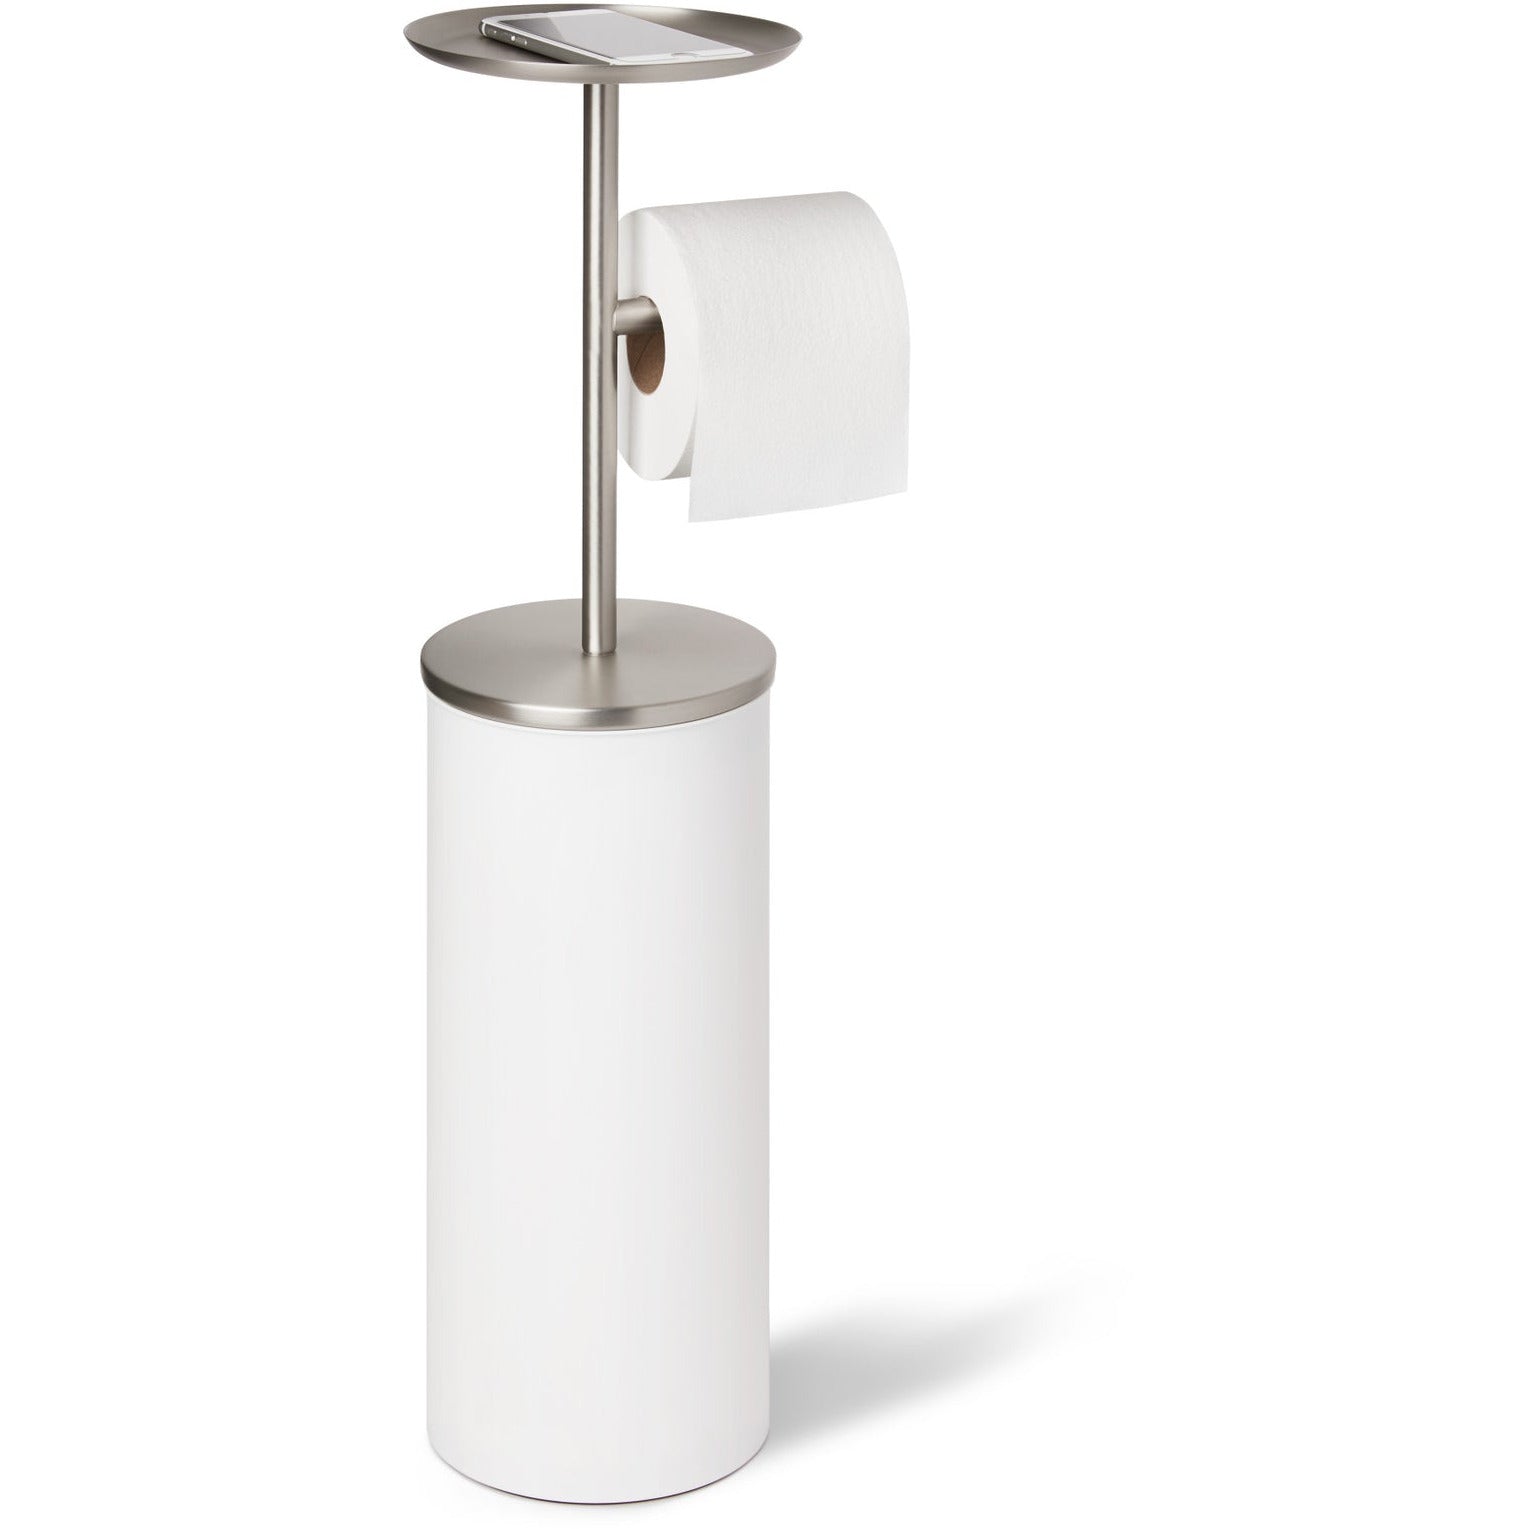 Portaloo Toilet Paper Stand and Storage